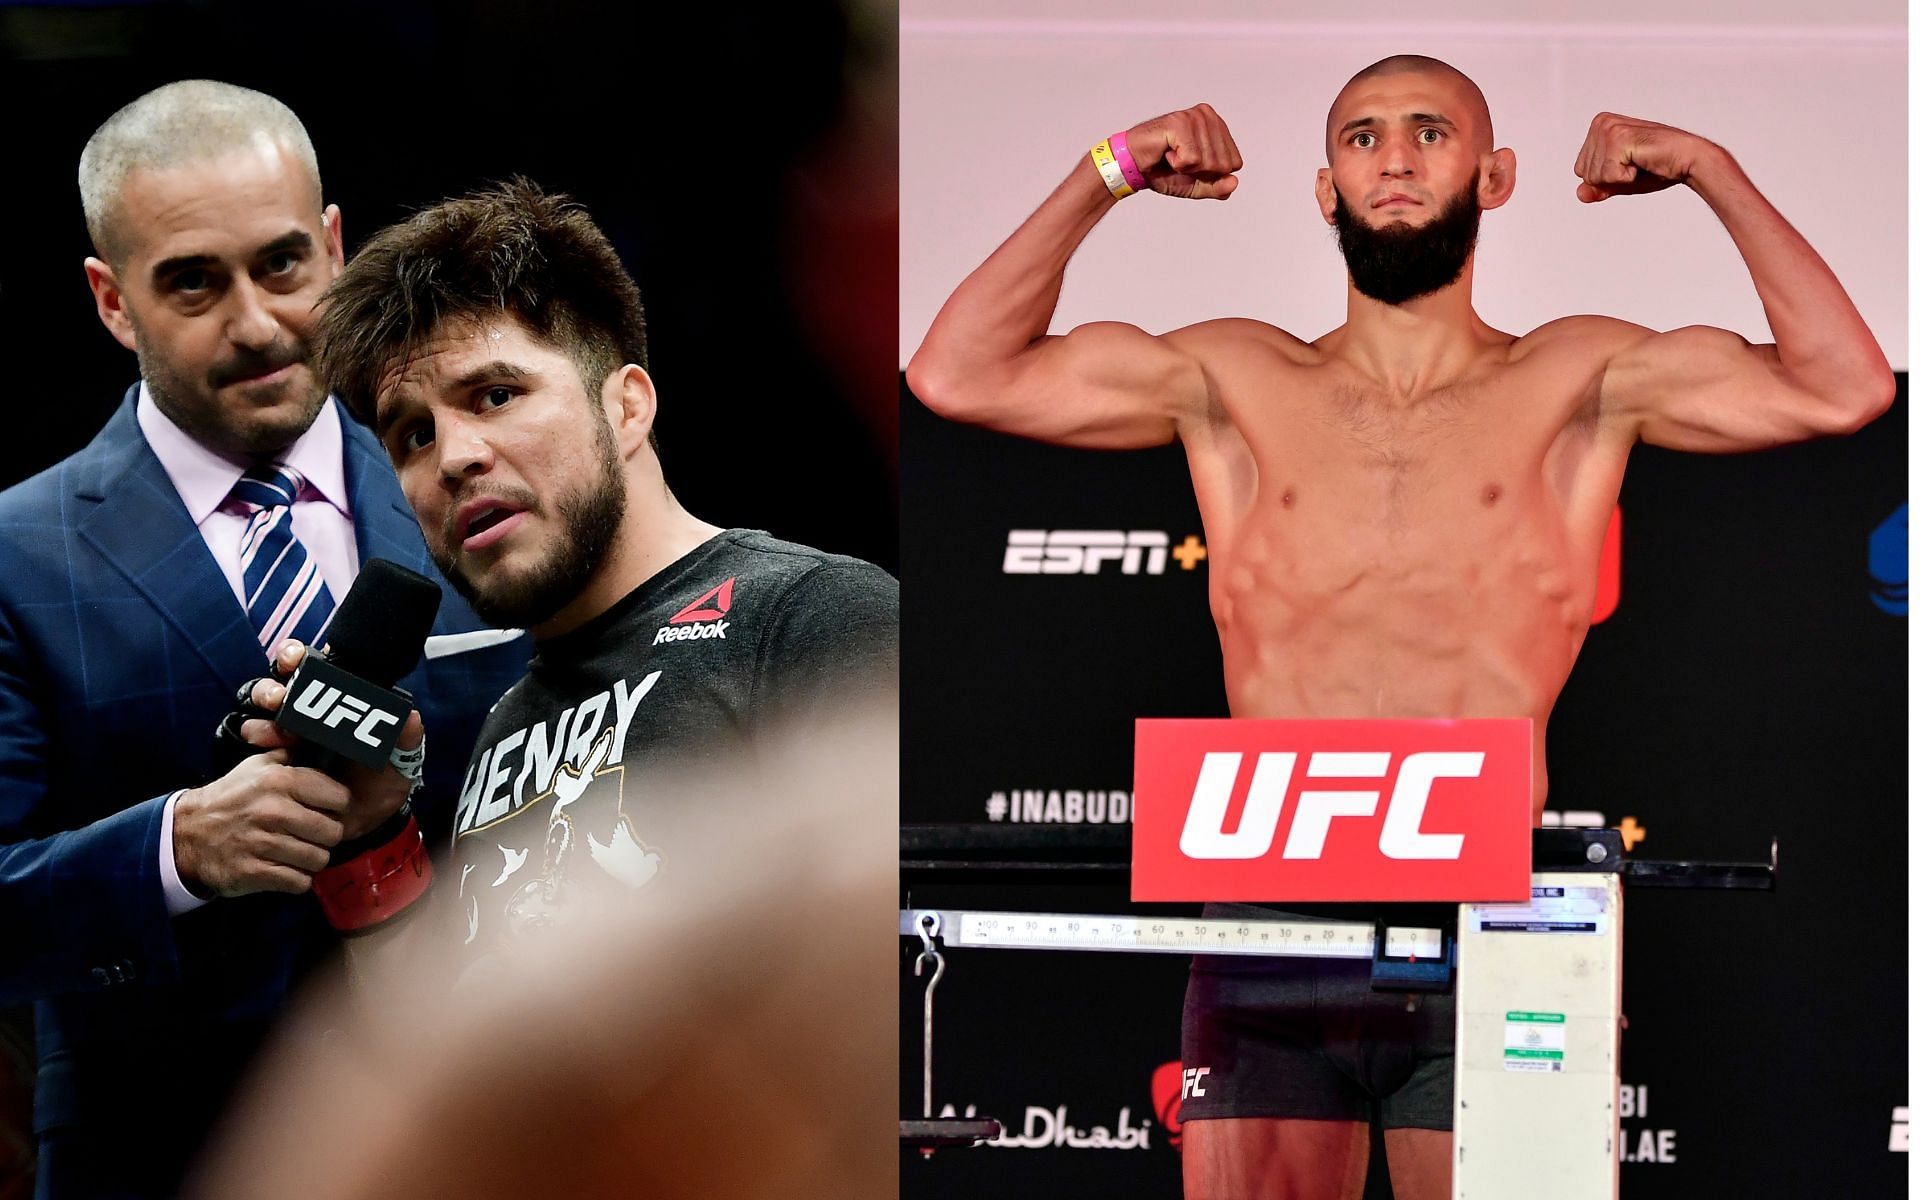 Henry Cejudo (left) and Khamzat Chimaev (right). [Images courtesy: both from Getty Images]